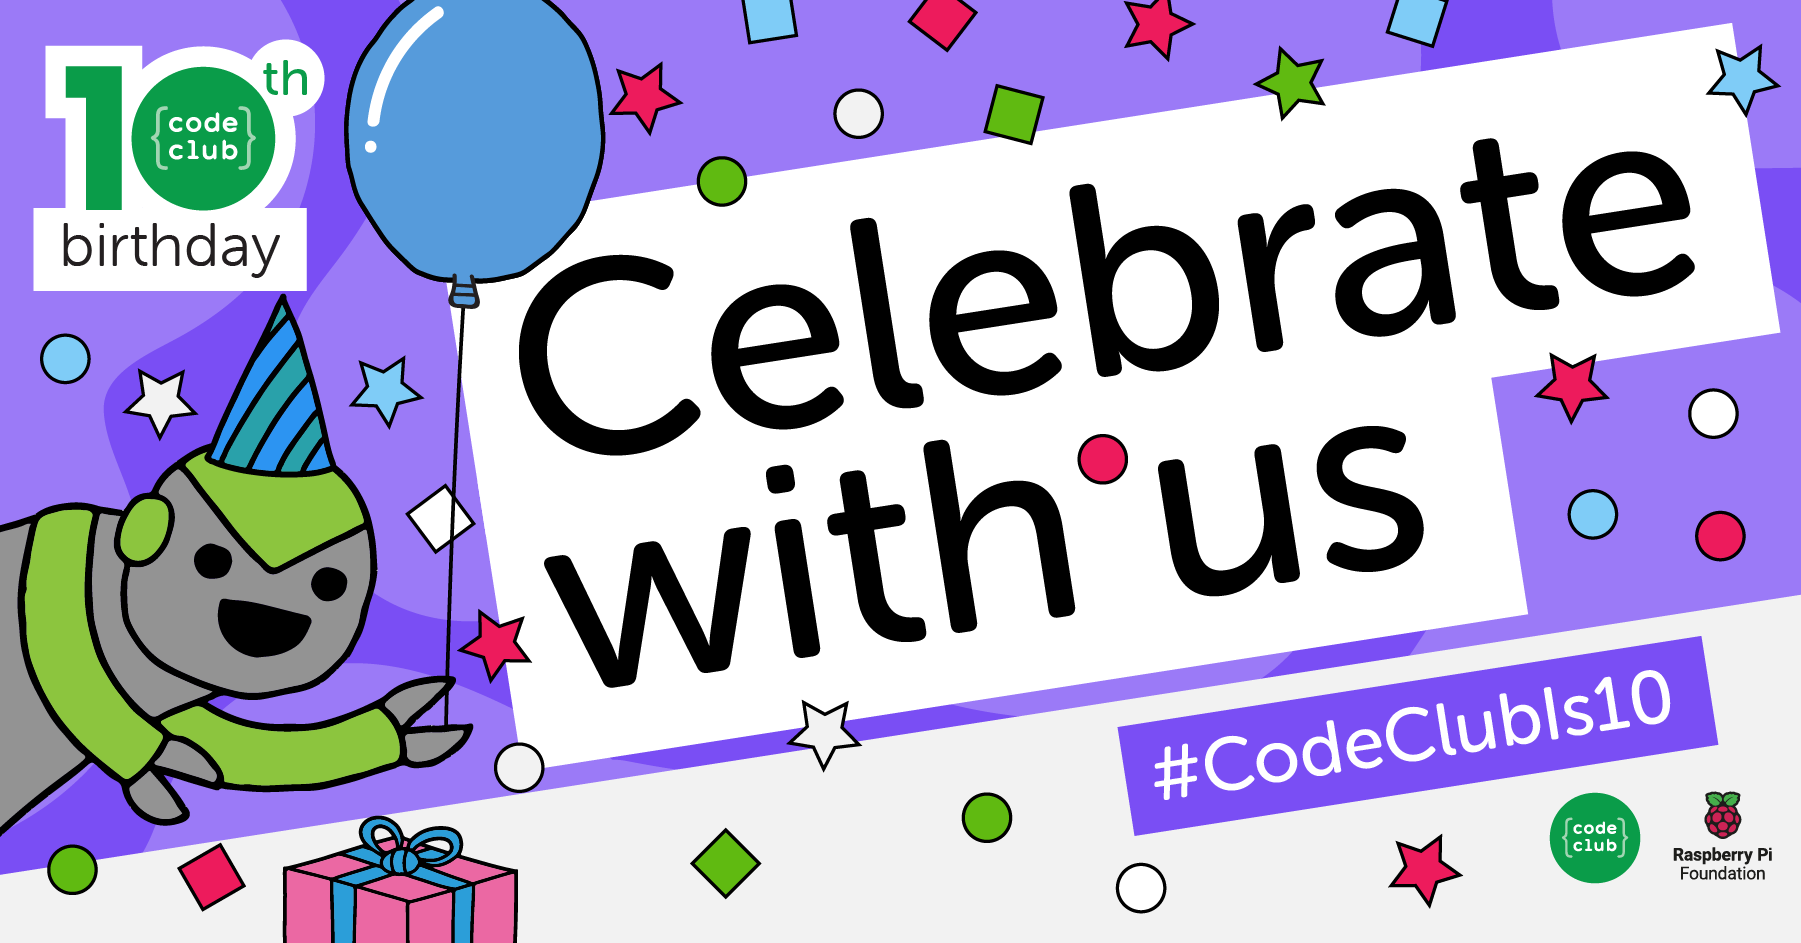 Image of Code Club robot asking you to celebrate with us. 